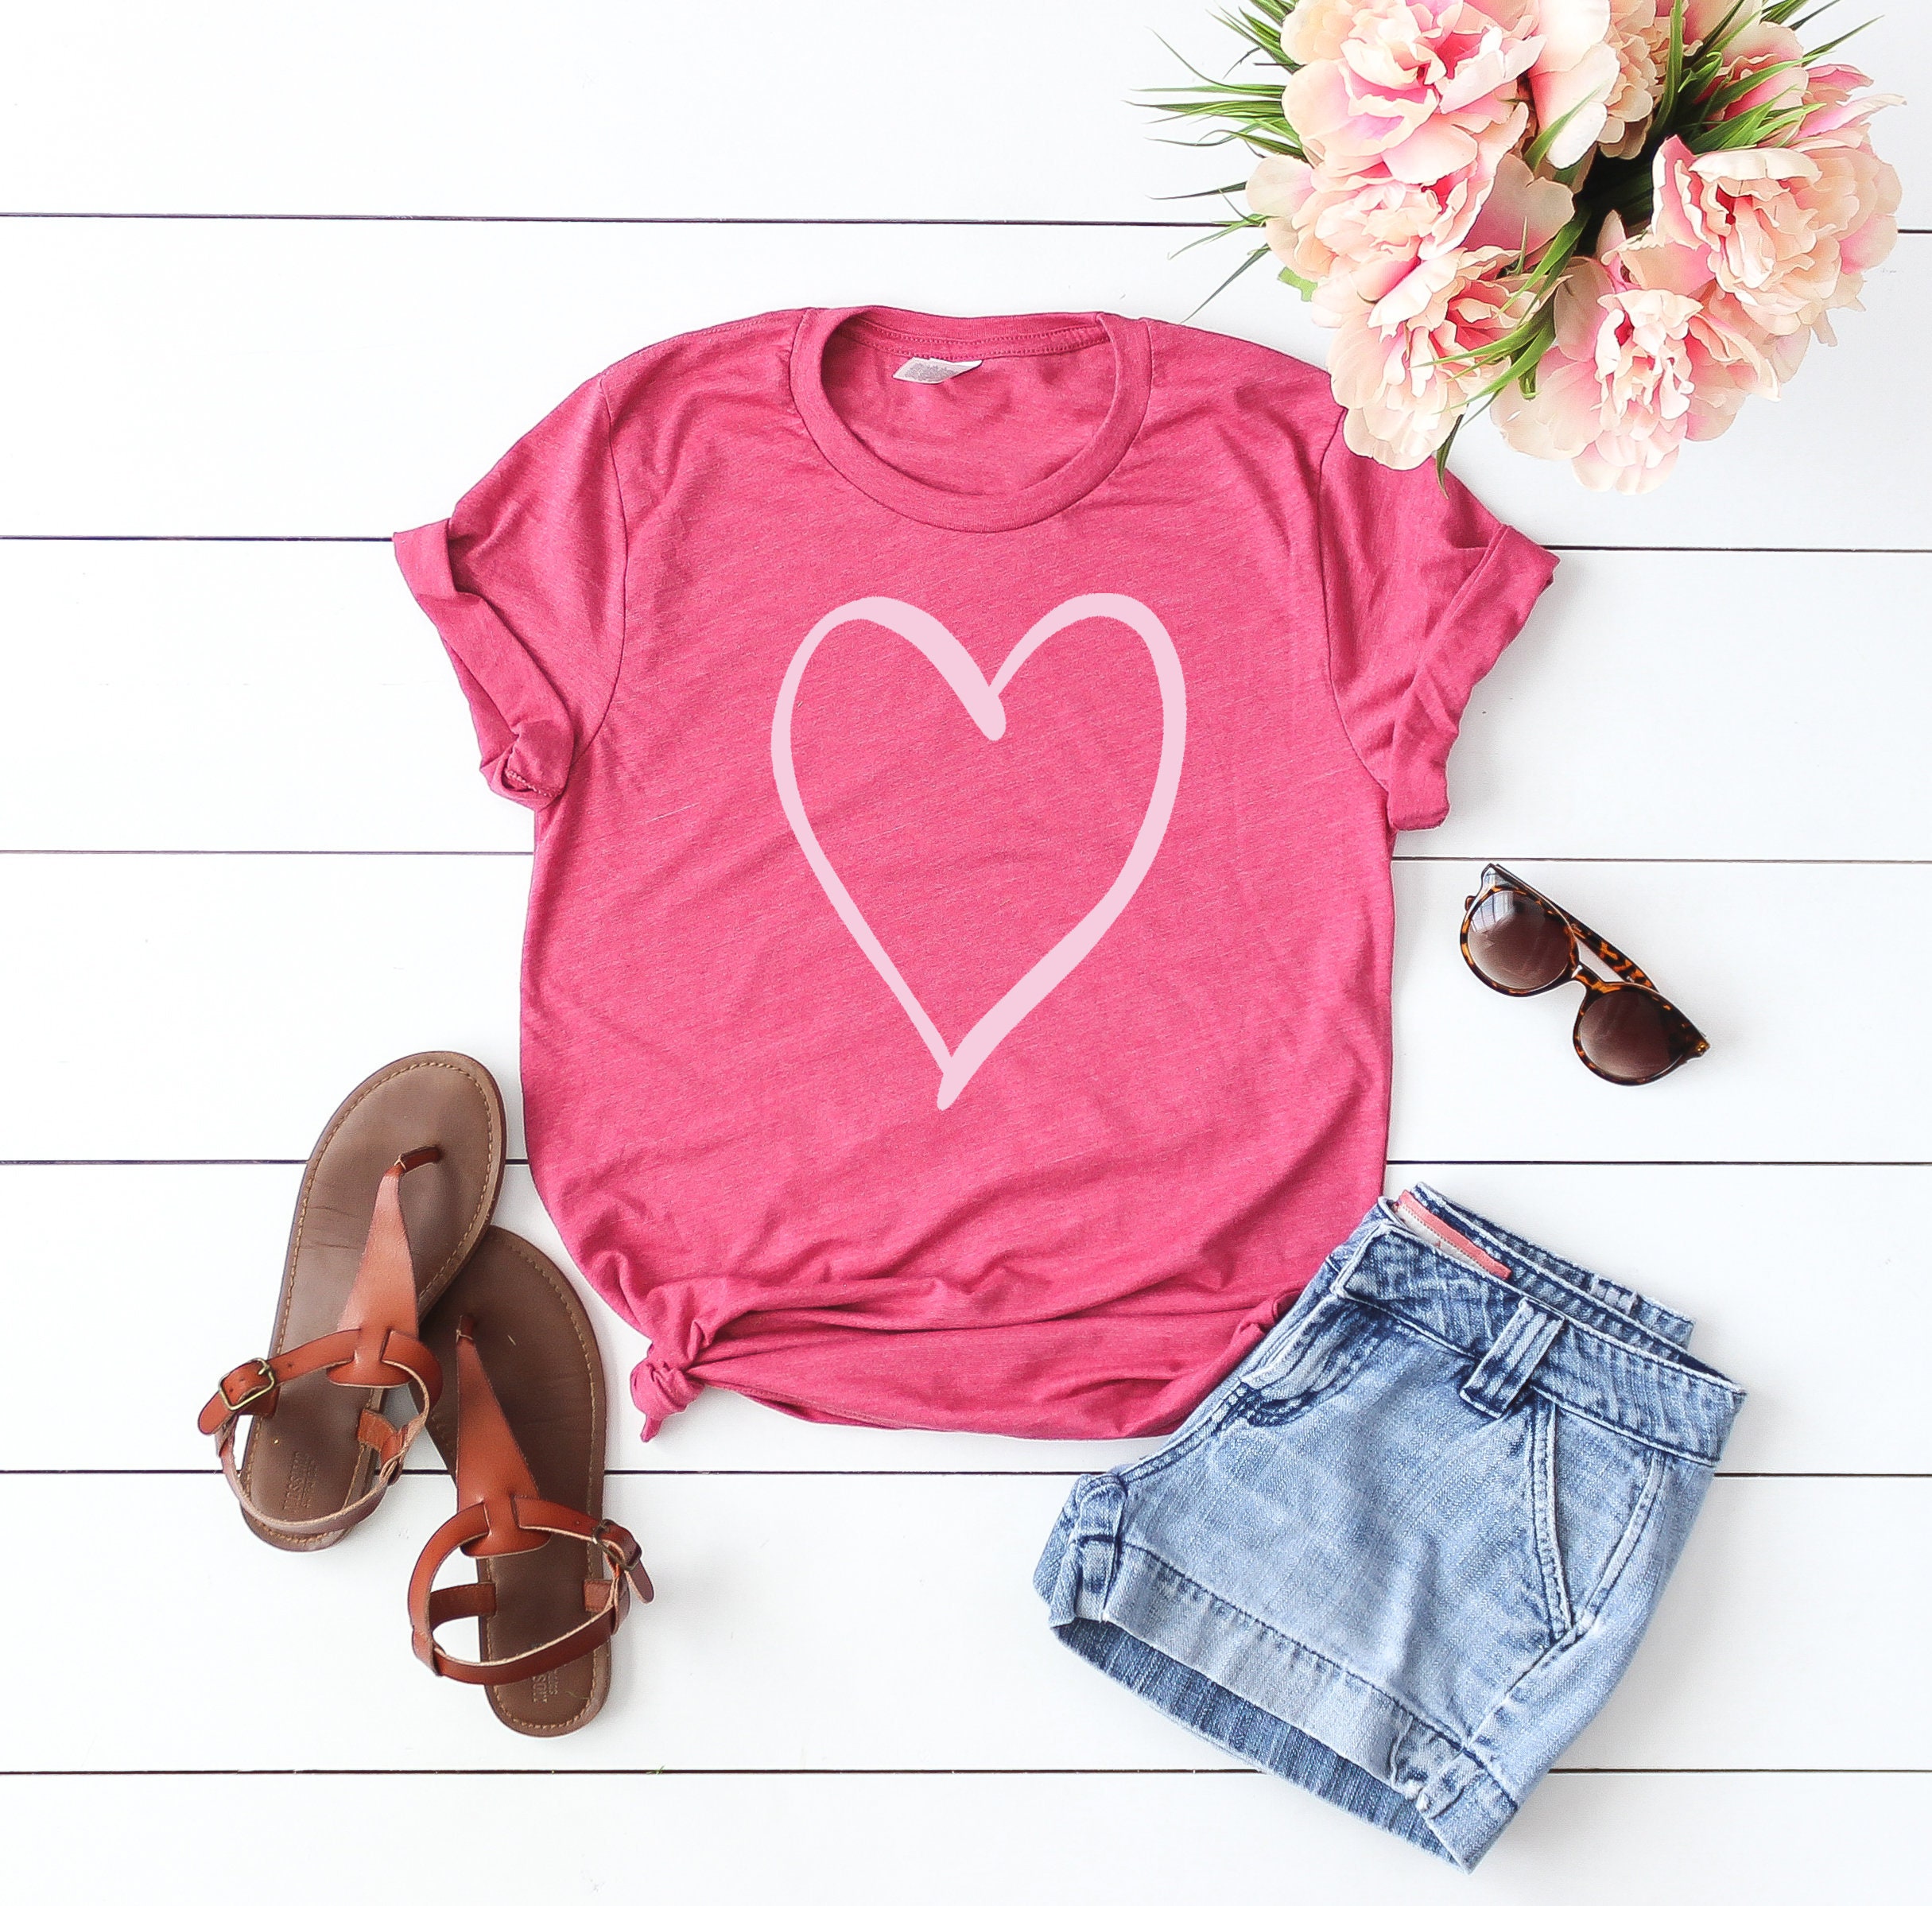 Cute Women S Valentine Top Valentine Day T Shirt For Etsy